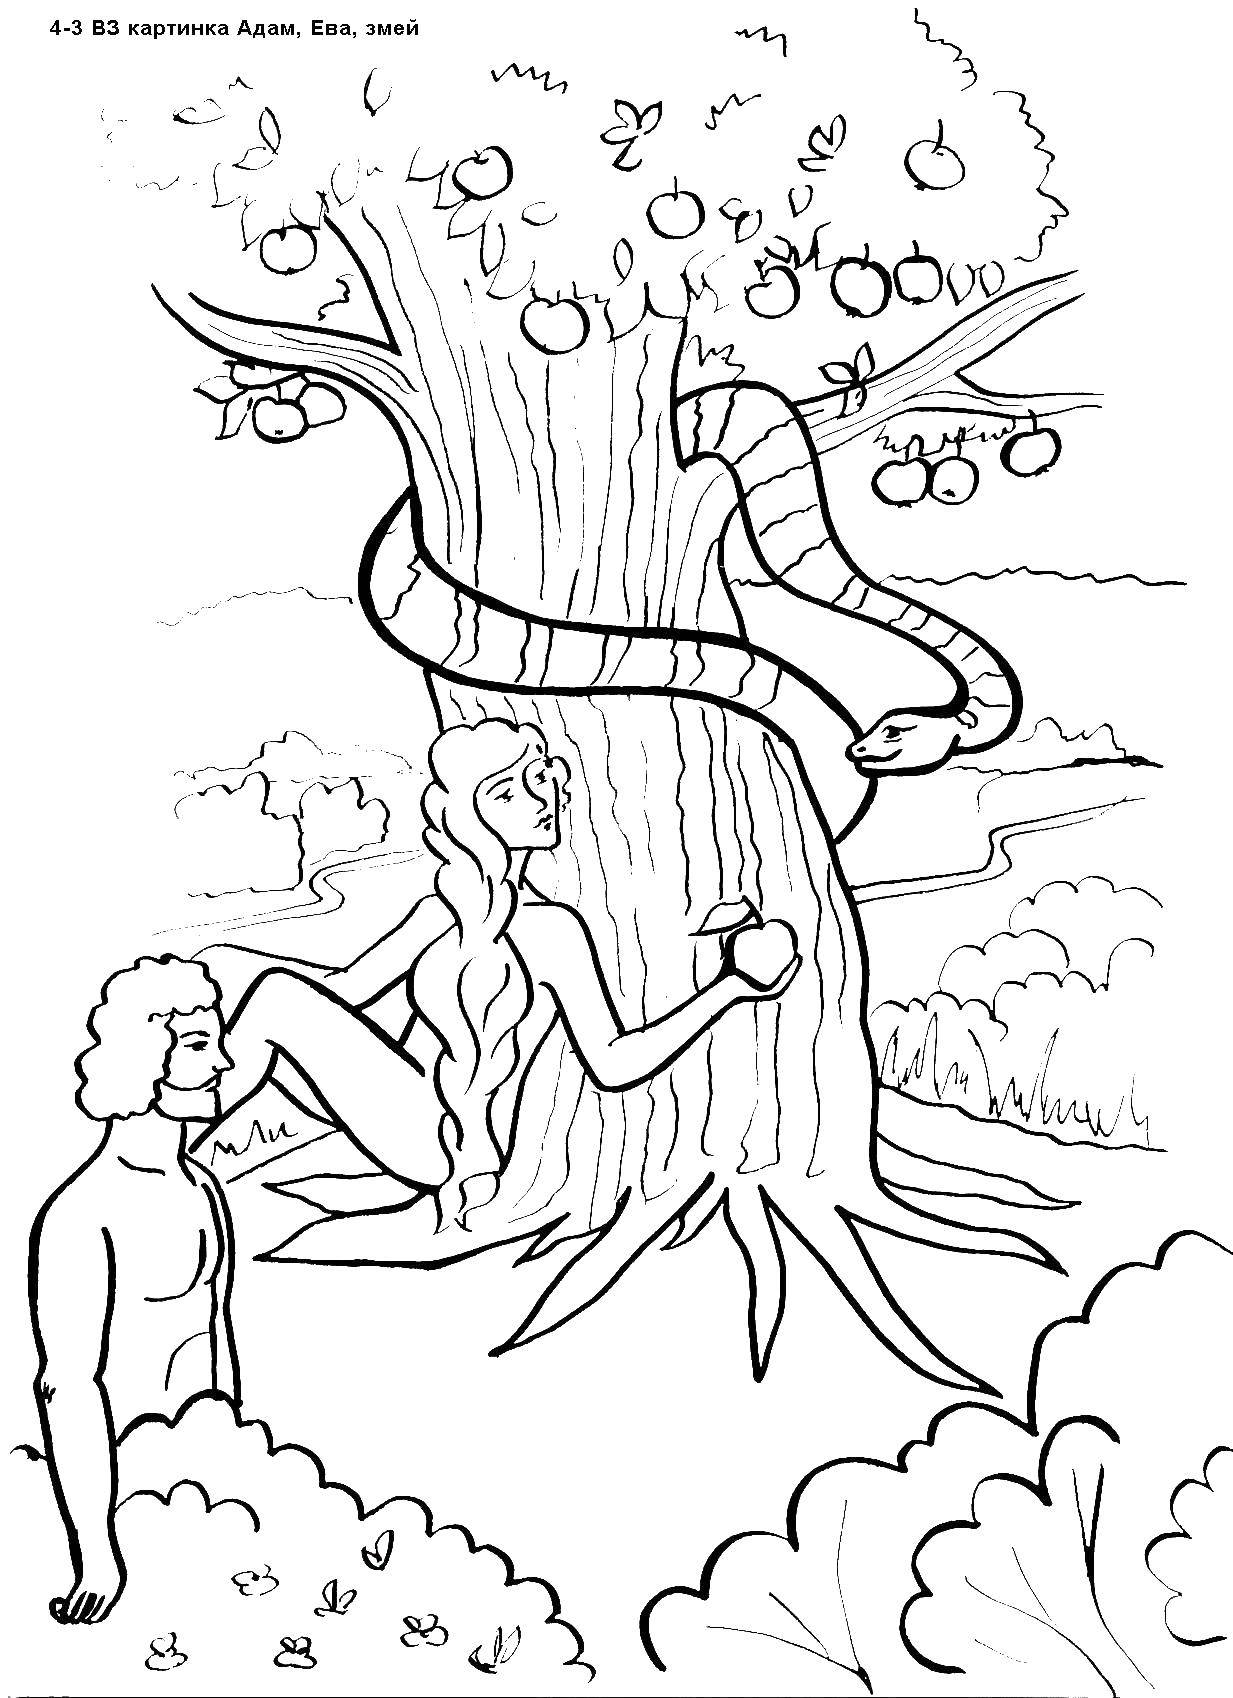 Coloring Tree with apples. Category Adam and eve. Tags:  Adam, eve, world, earth.